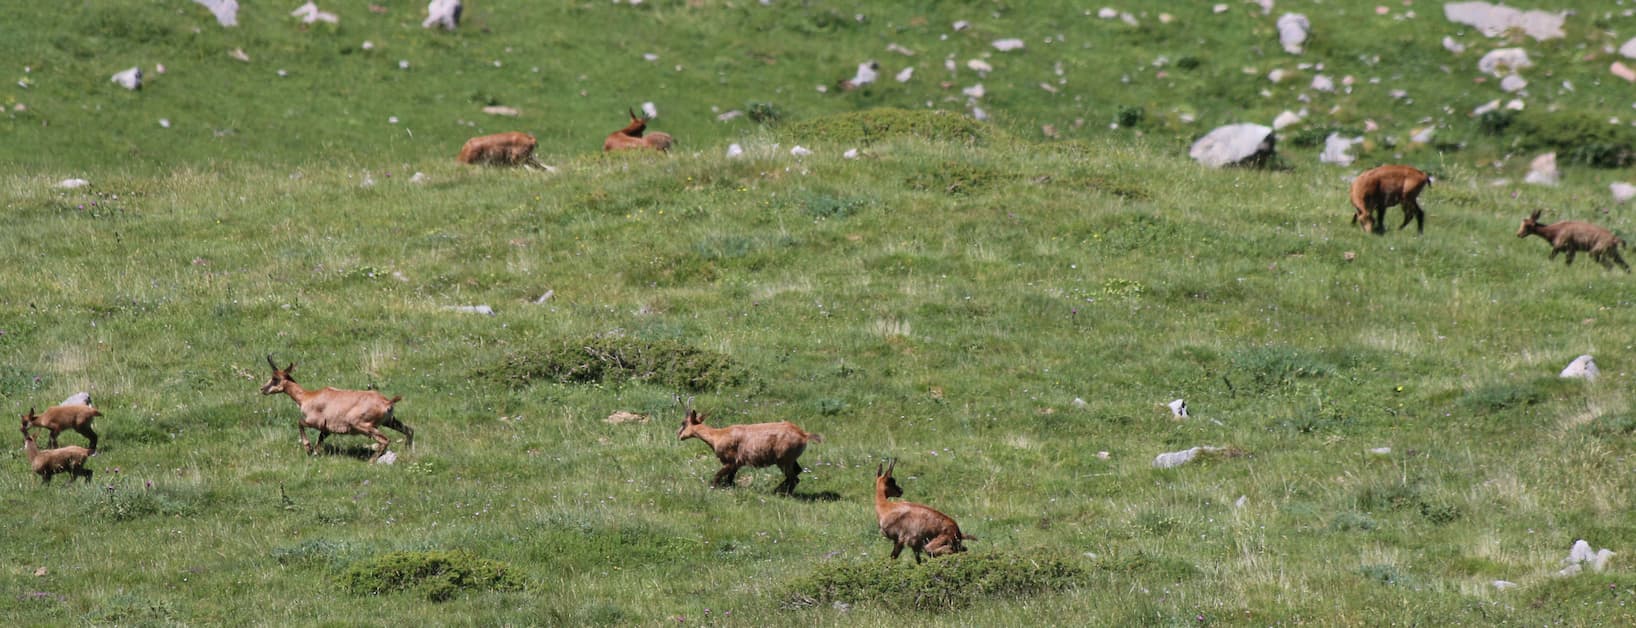 Female group with her calfs, in an alpine meadow.